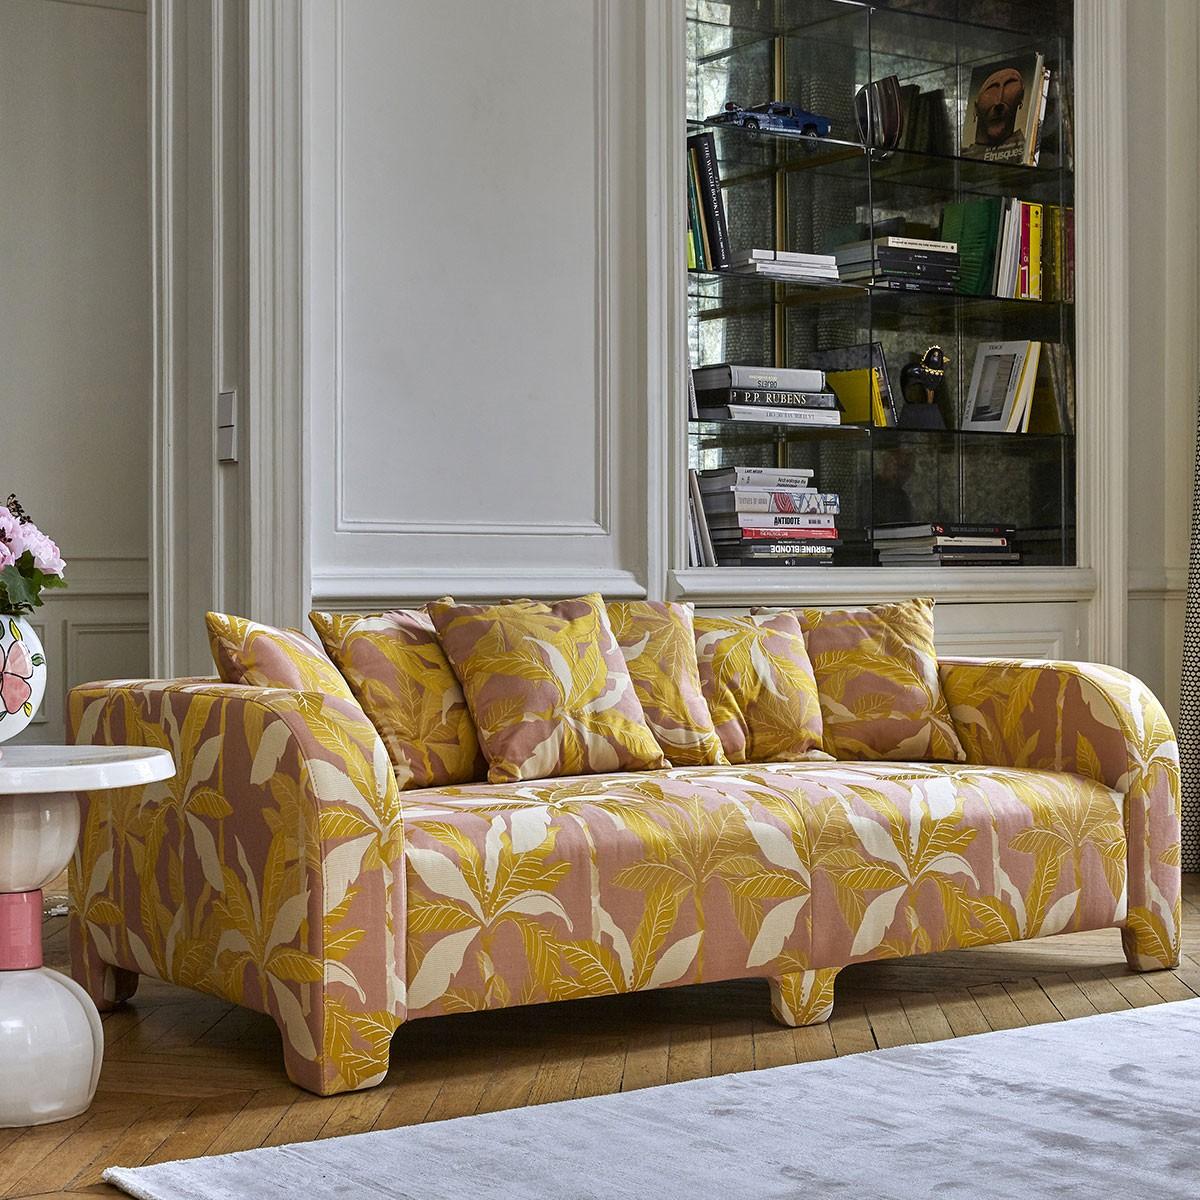 Popus Editions Graziella 4 Seater Sofa in Pink Miami Jacquard Fabric

A foot that hides another. A cushion that hides another. A curve that hides another with contemporary lines and a base like a punctuation mark, this sofa gives pride of place to